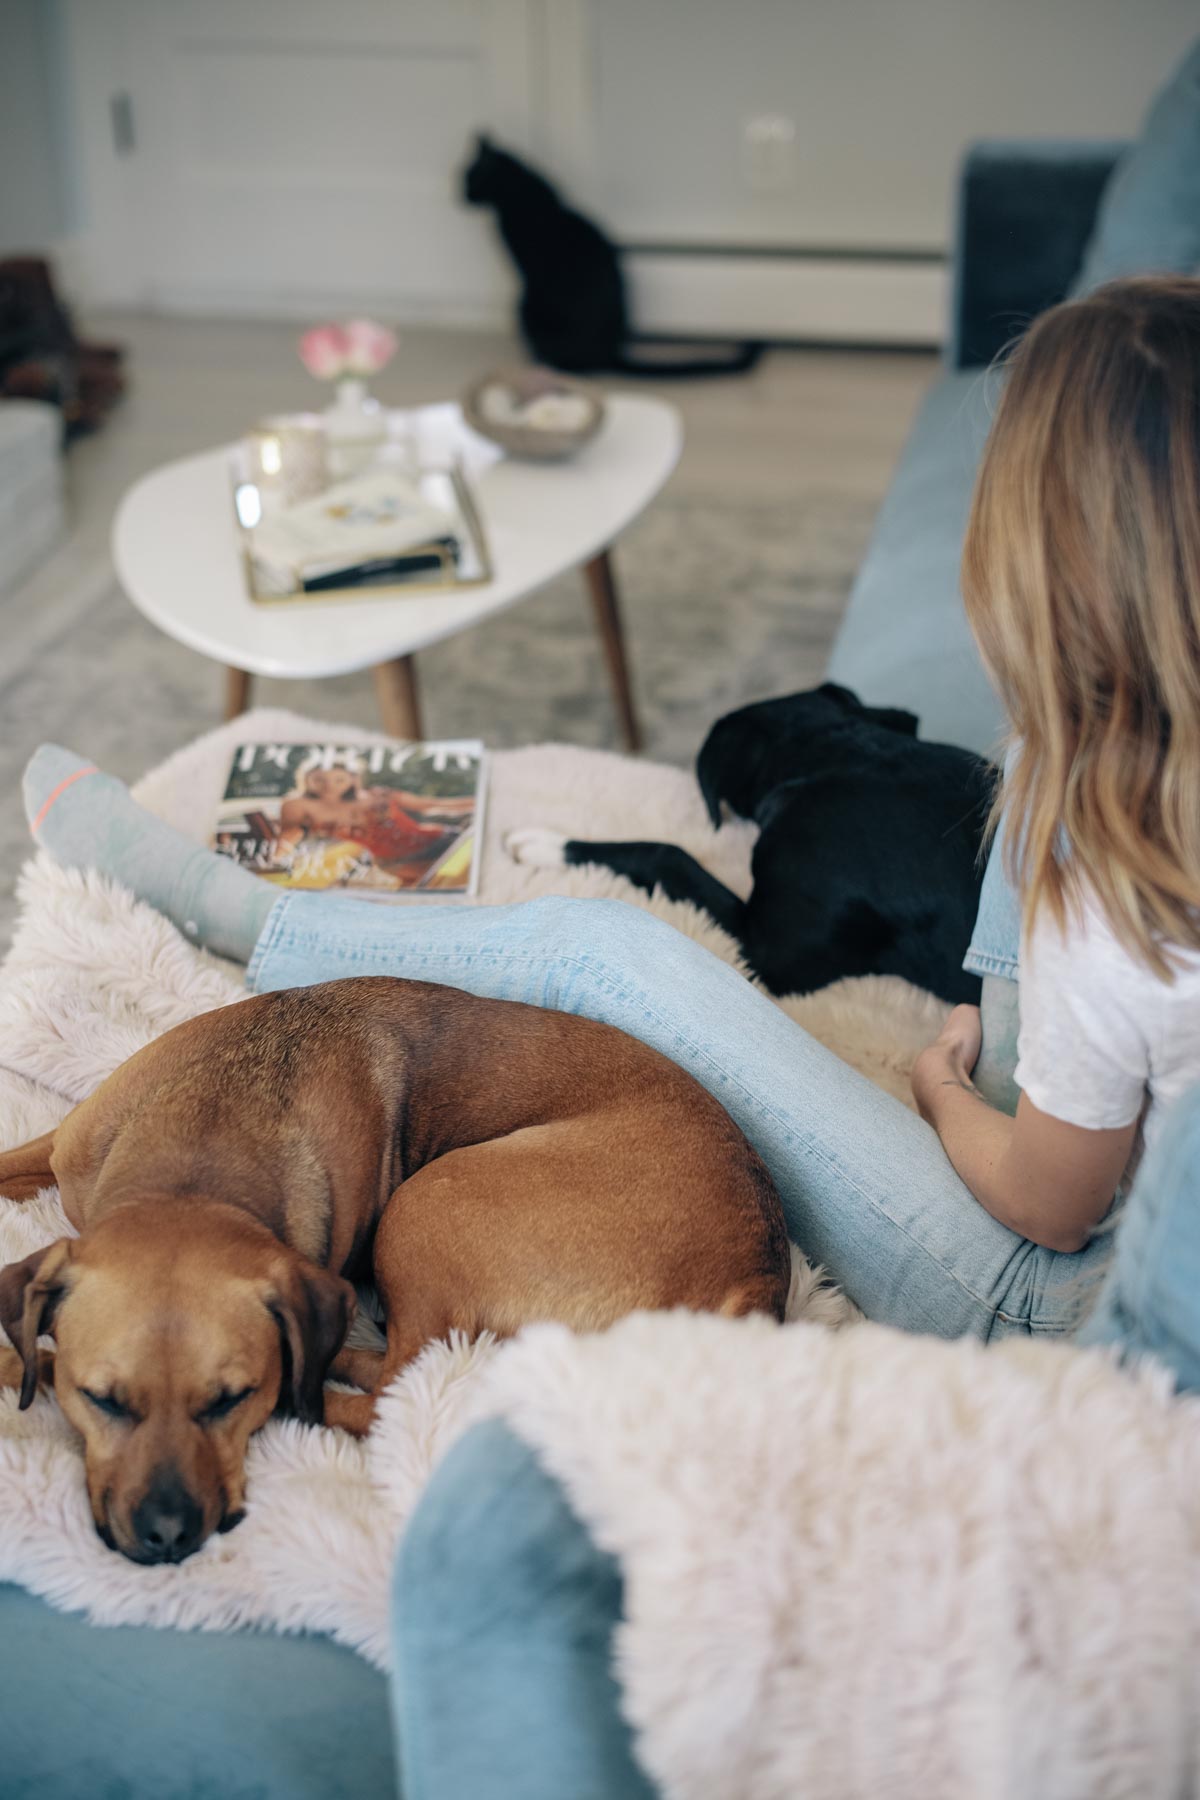 Jess Ann Kirby relaxes on her blue velvet sofa with a blush faux fur throw blanket